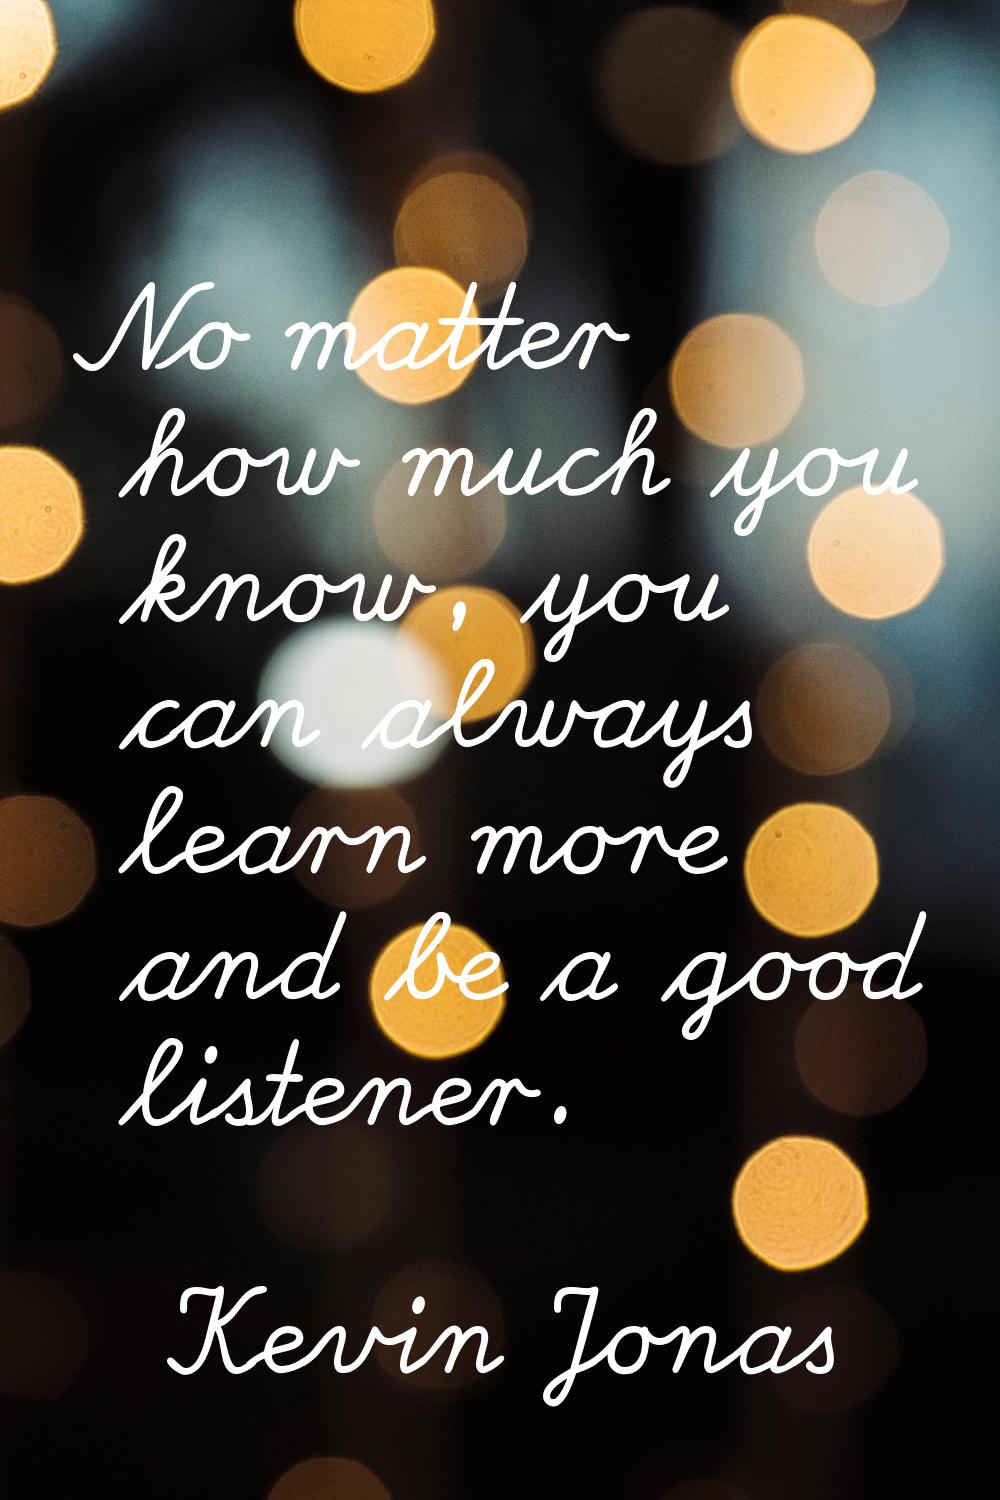 No matter how much you know, you can always learn more and be a good listener.